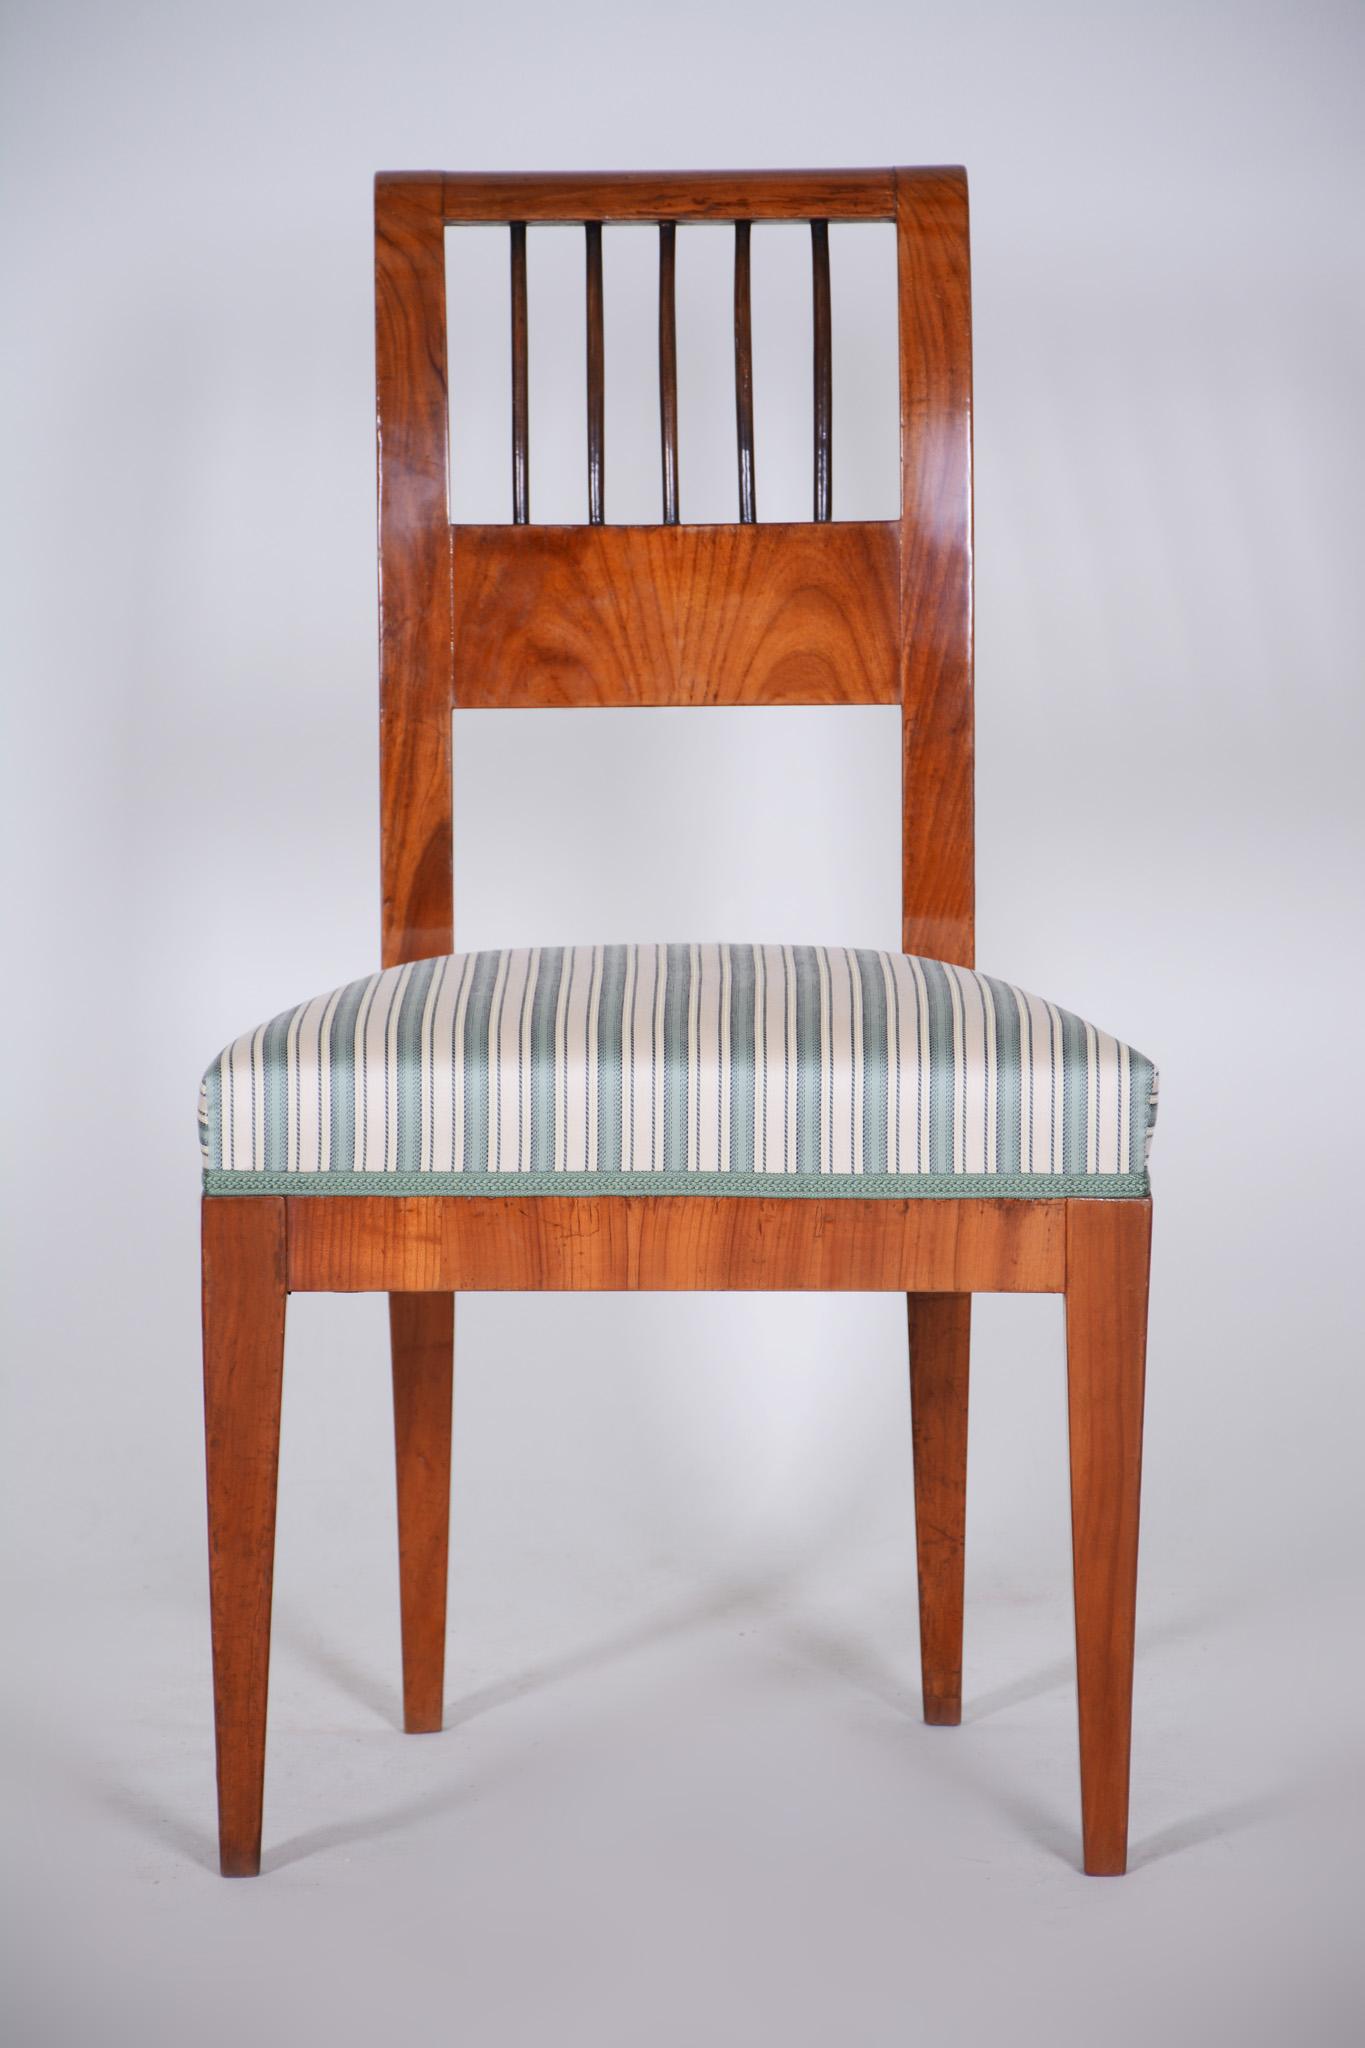 Biedermeier chair
Completely restored, new fabric and upholstery included.
Source: Czechia (Bohemia)
Material: Cherry tree
Period: 1820-1829
Shellac-polish.

We guarantee safe a the cheapest air transport from Europe to the whole world within 7